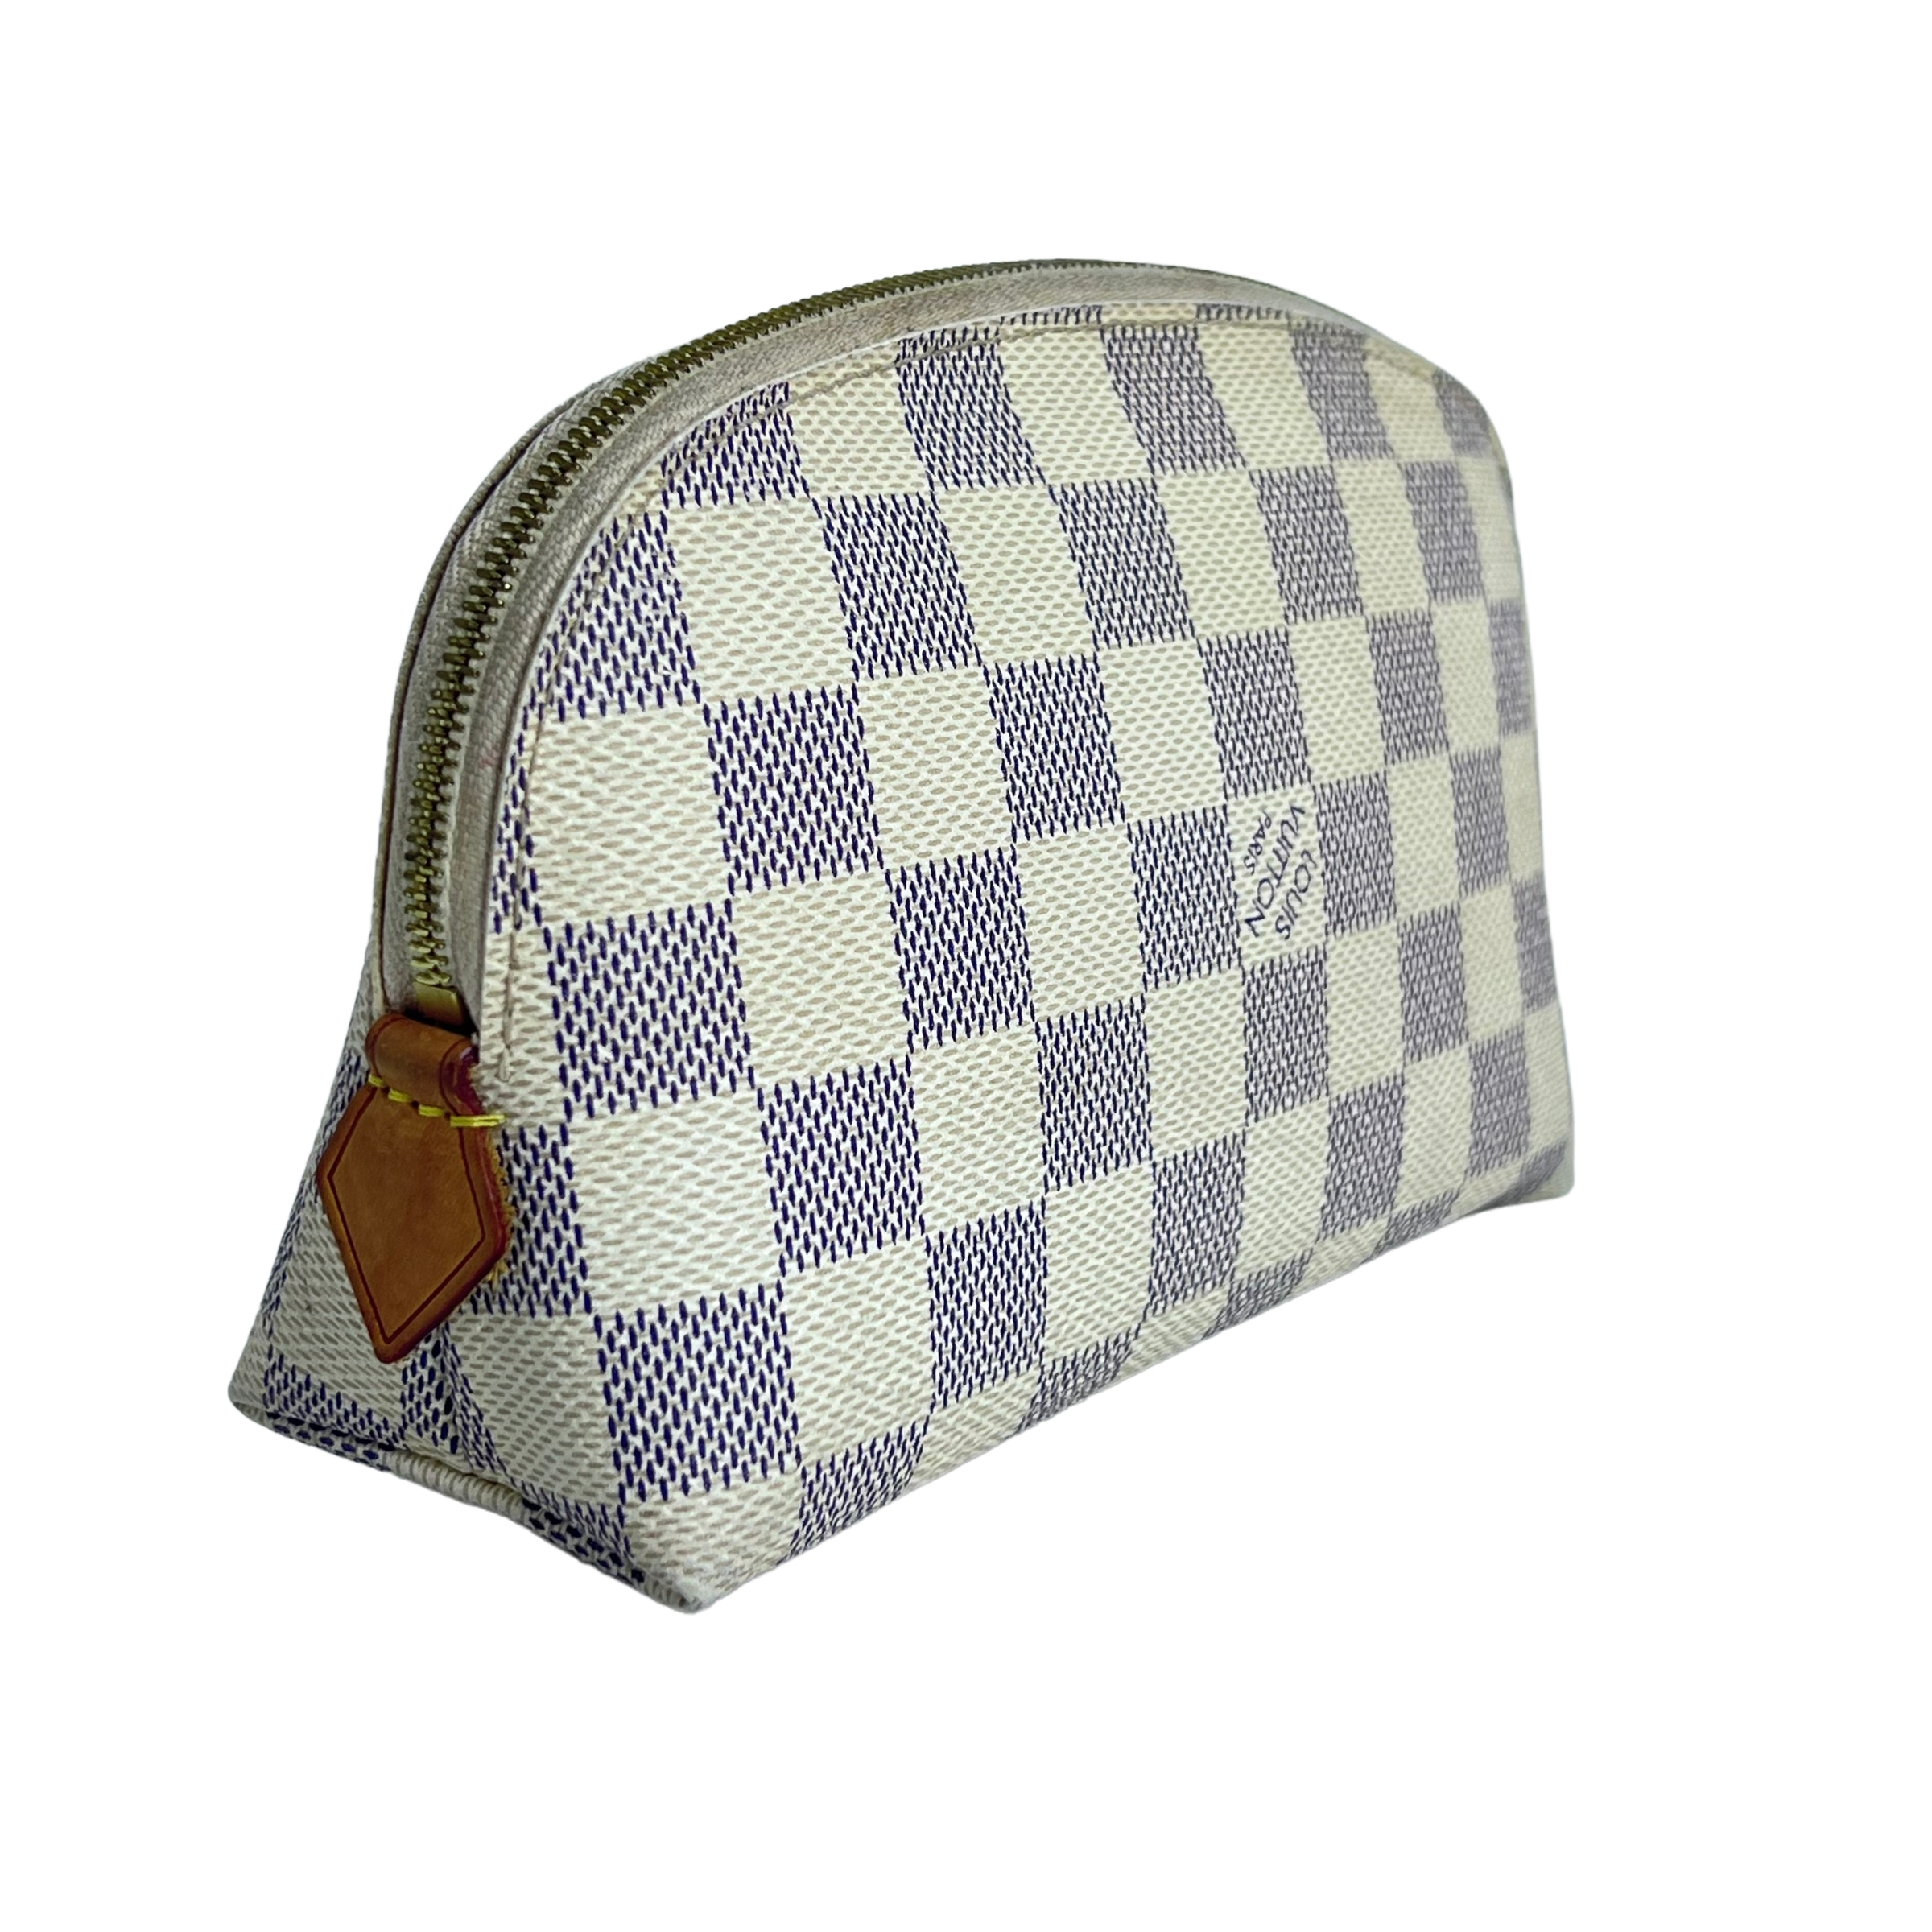 Damier Azur Cosmetic Pouch